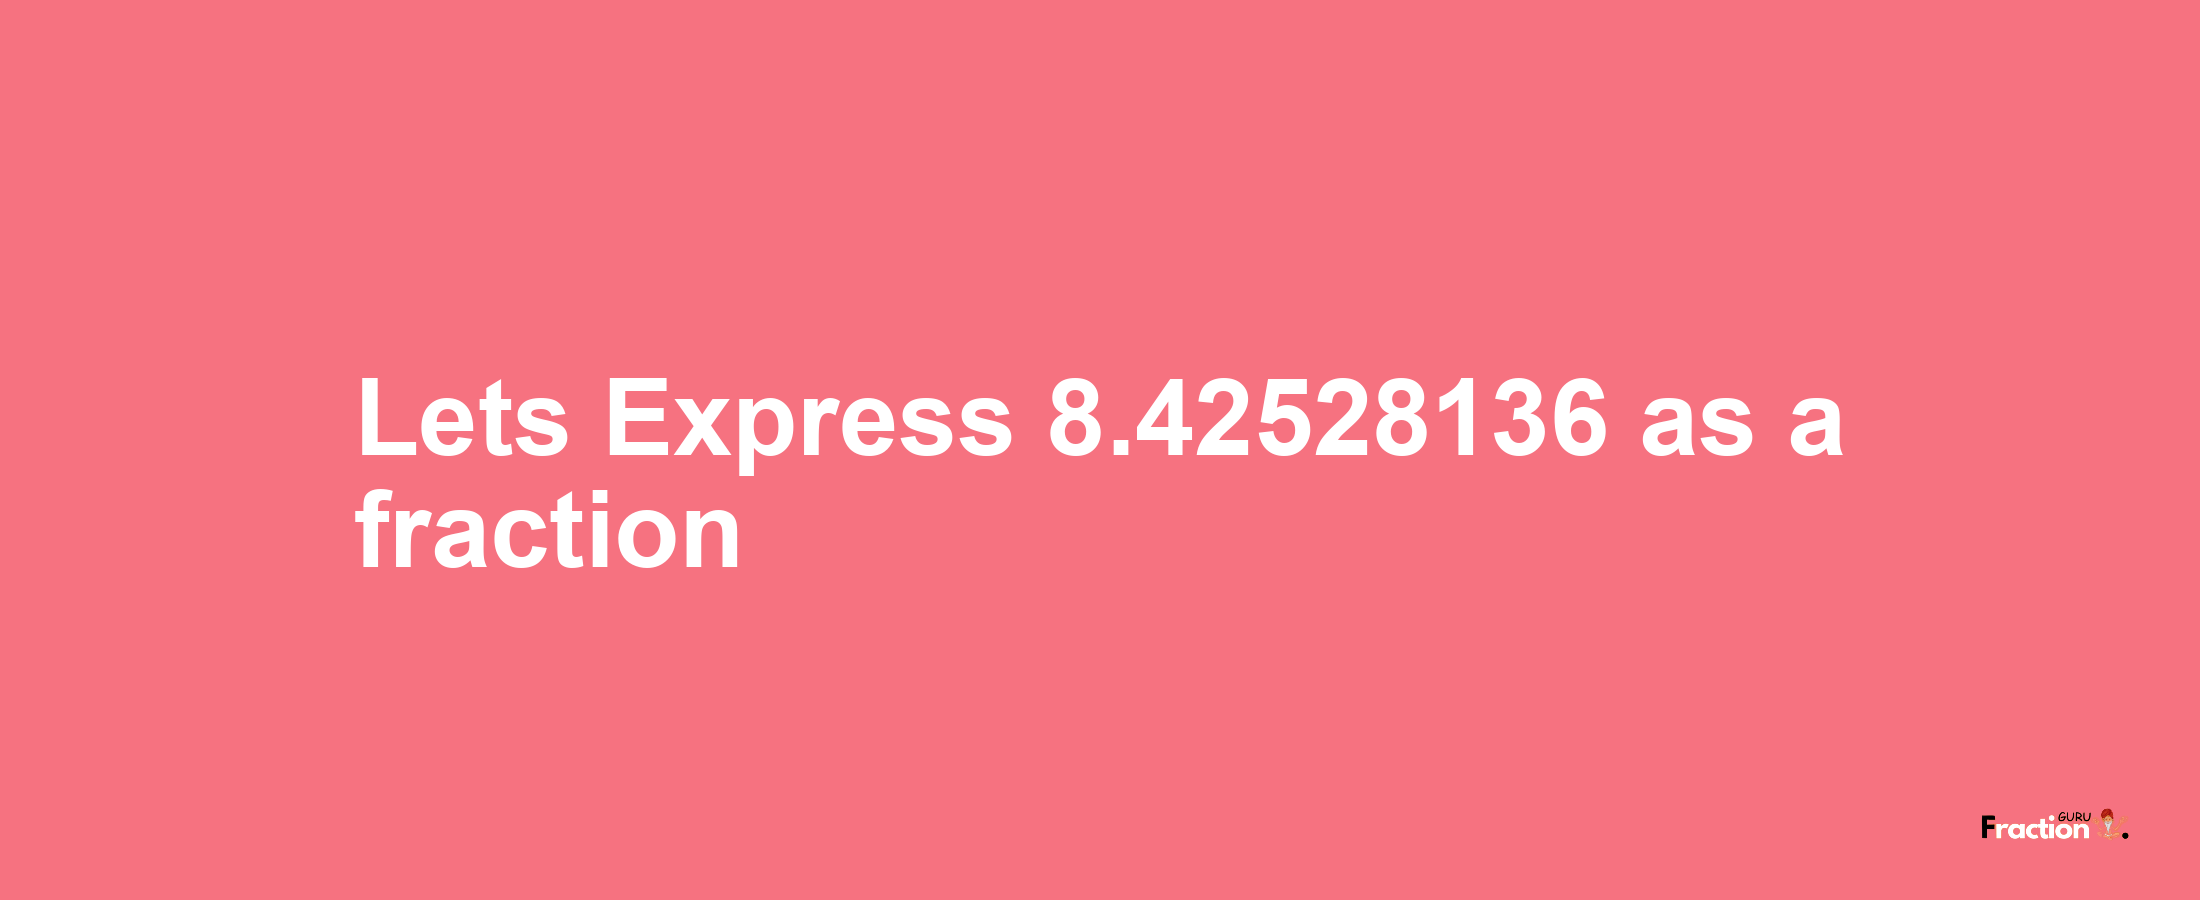 Lets Express 8.42528136 as afraction